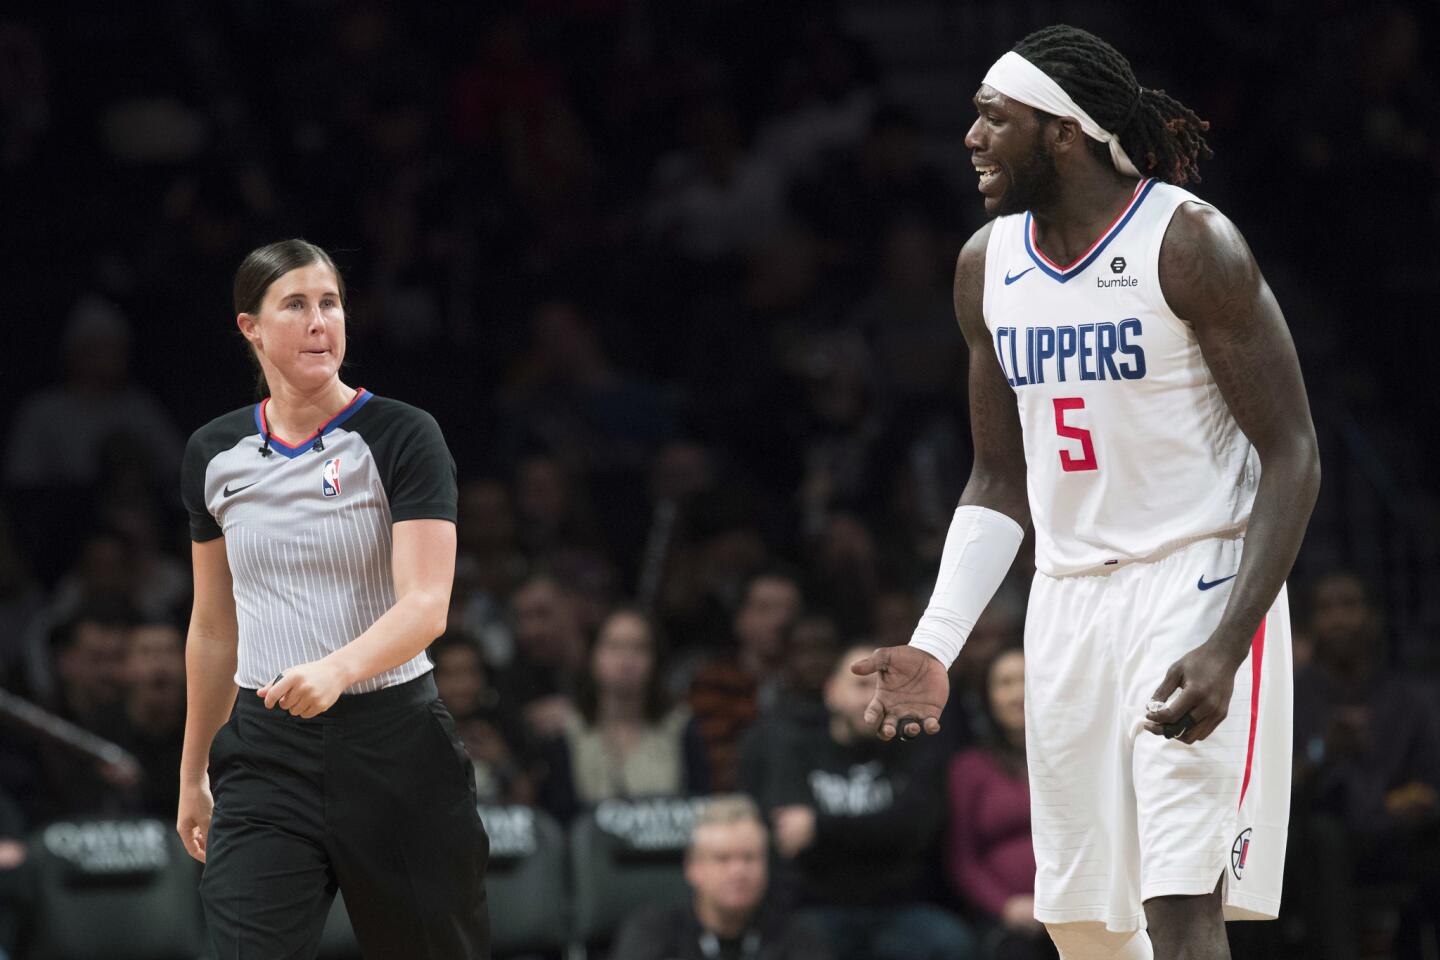 Los Angeles Clippers forward Montrezl Harrell (5) argues with referee Natalie Sago during the second half of an NBA basketball game, Saturday, Nov. 17, 2018, in New York. The Clippers won 127-119. (AP Photo/Mary Altaffer)